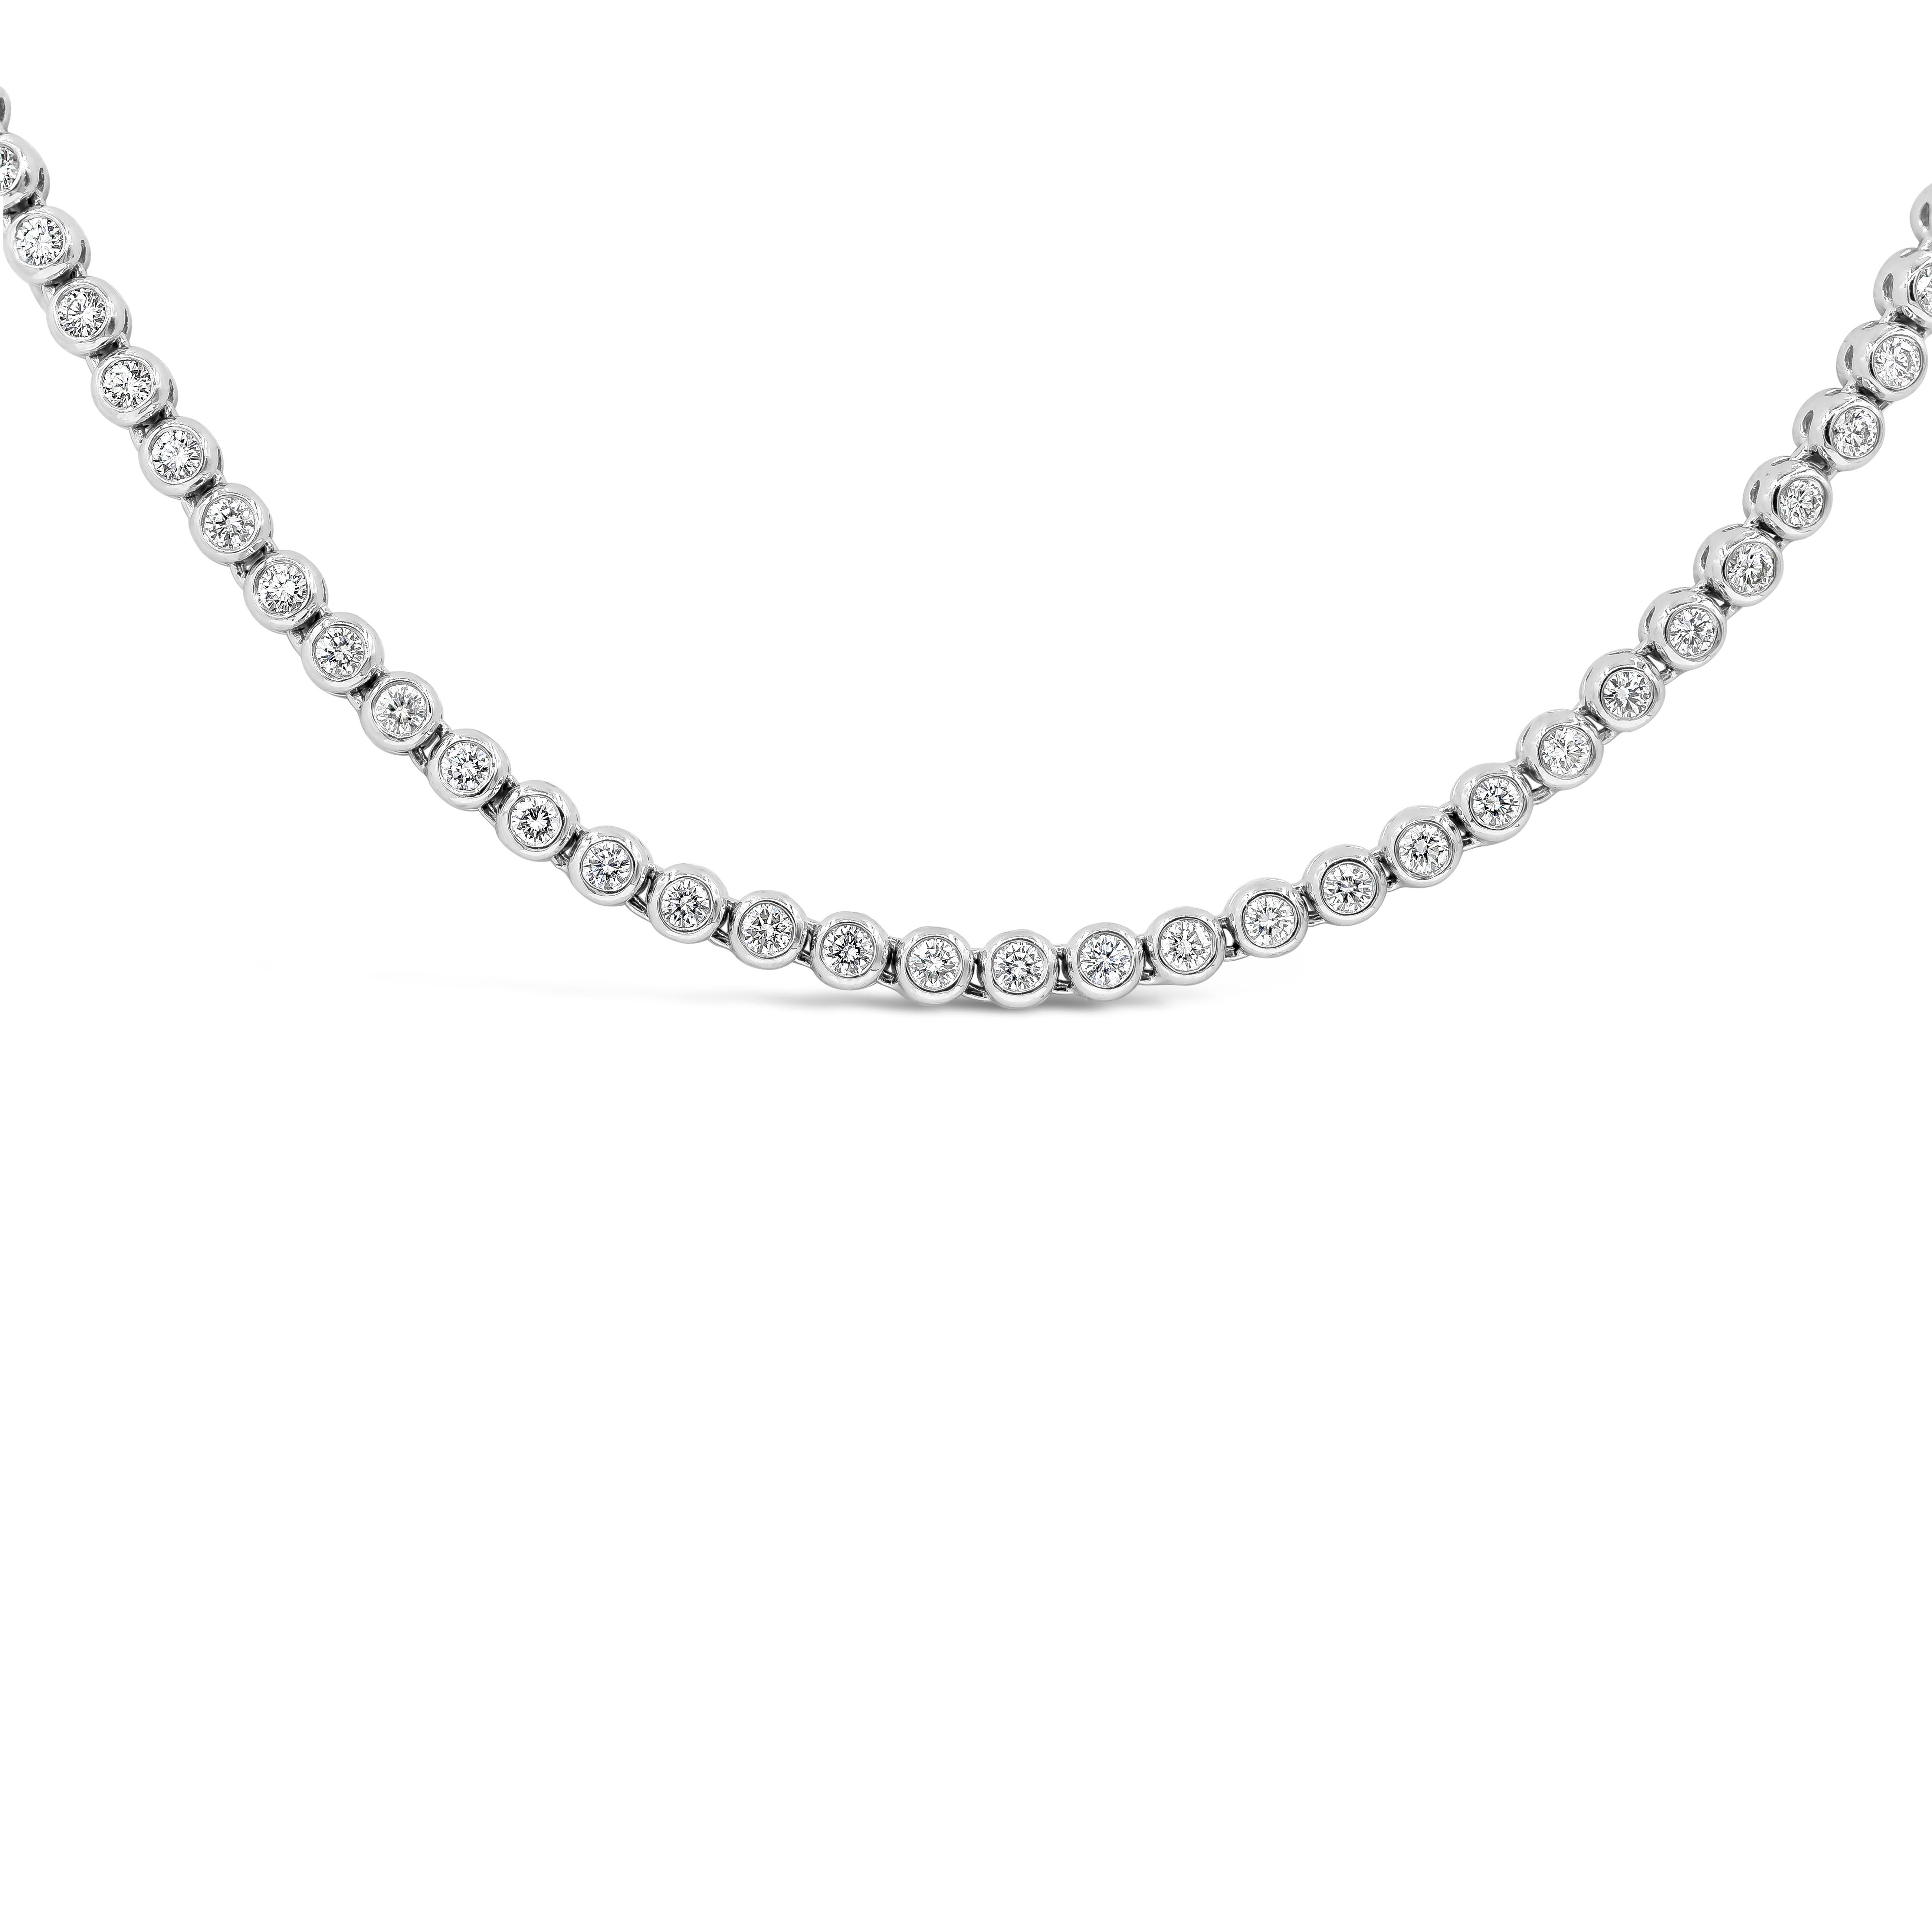 A versatile tennis necklace for casual, everyday wear or to compliment a formal style. Showcases round brilliant diamonds set in a 14 karat white gold bezel. Diamonds weigh 6.03 carats total. 16 inches in length. 

Style available in different price